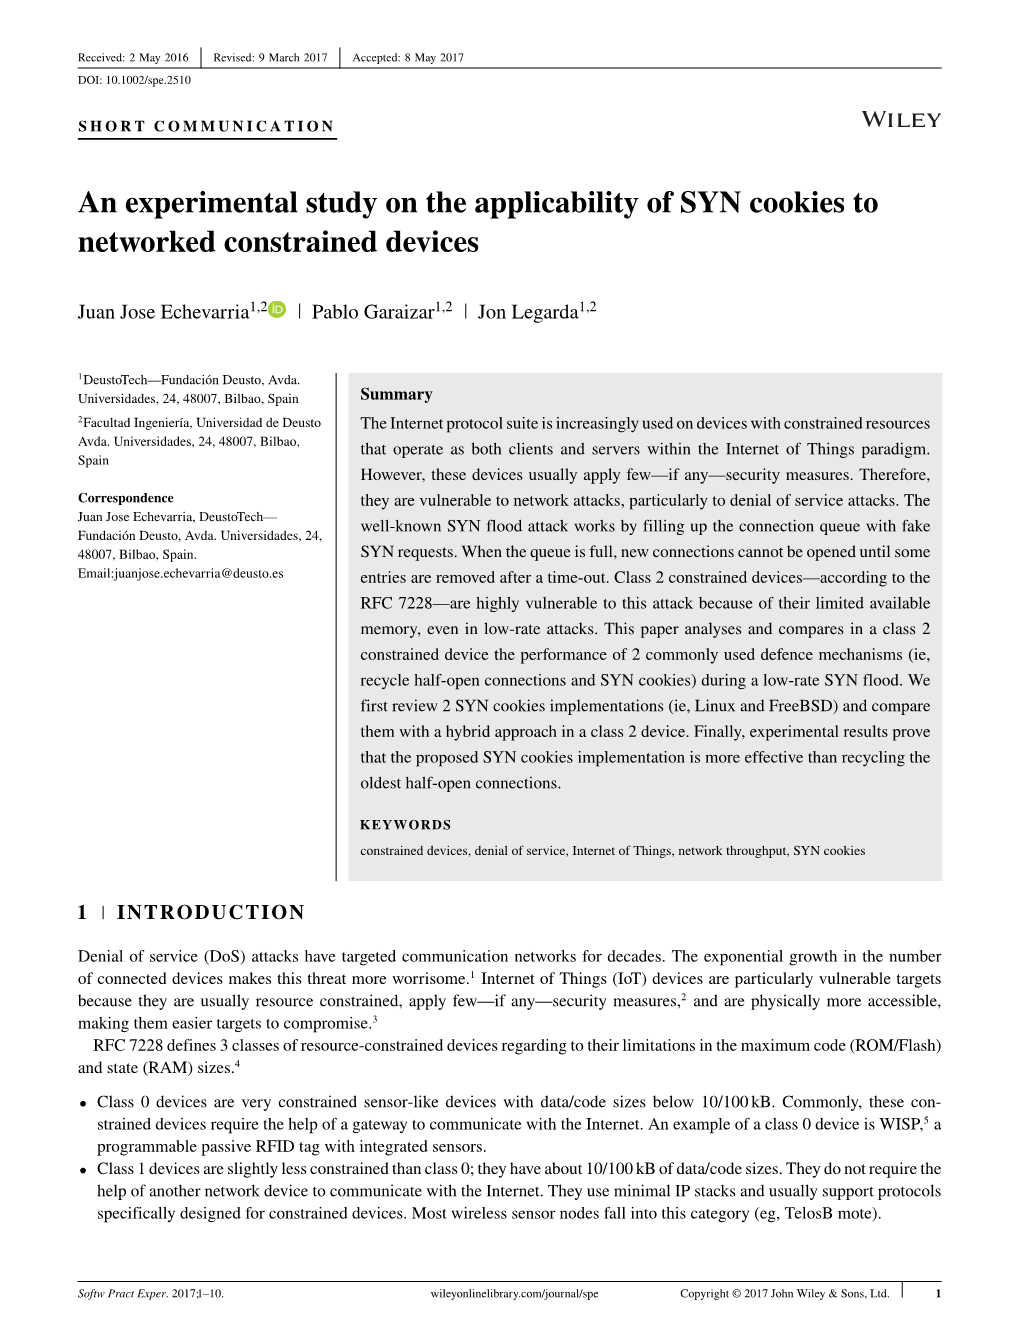 An Experimental Study on the Applicability of SYN Cookies to Networked Constrained Devices